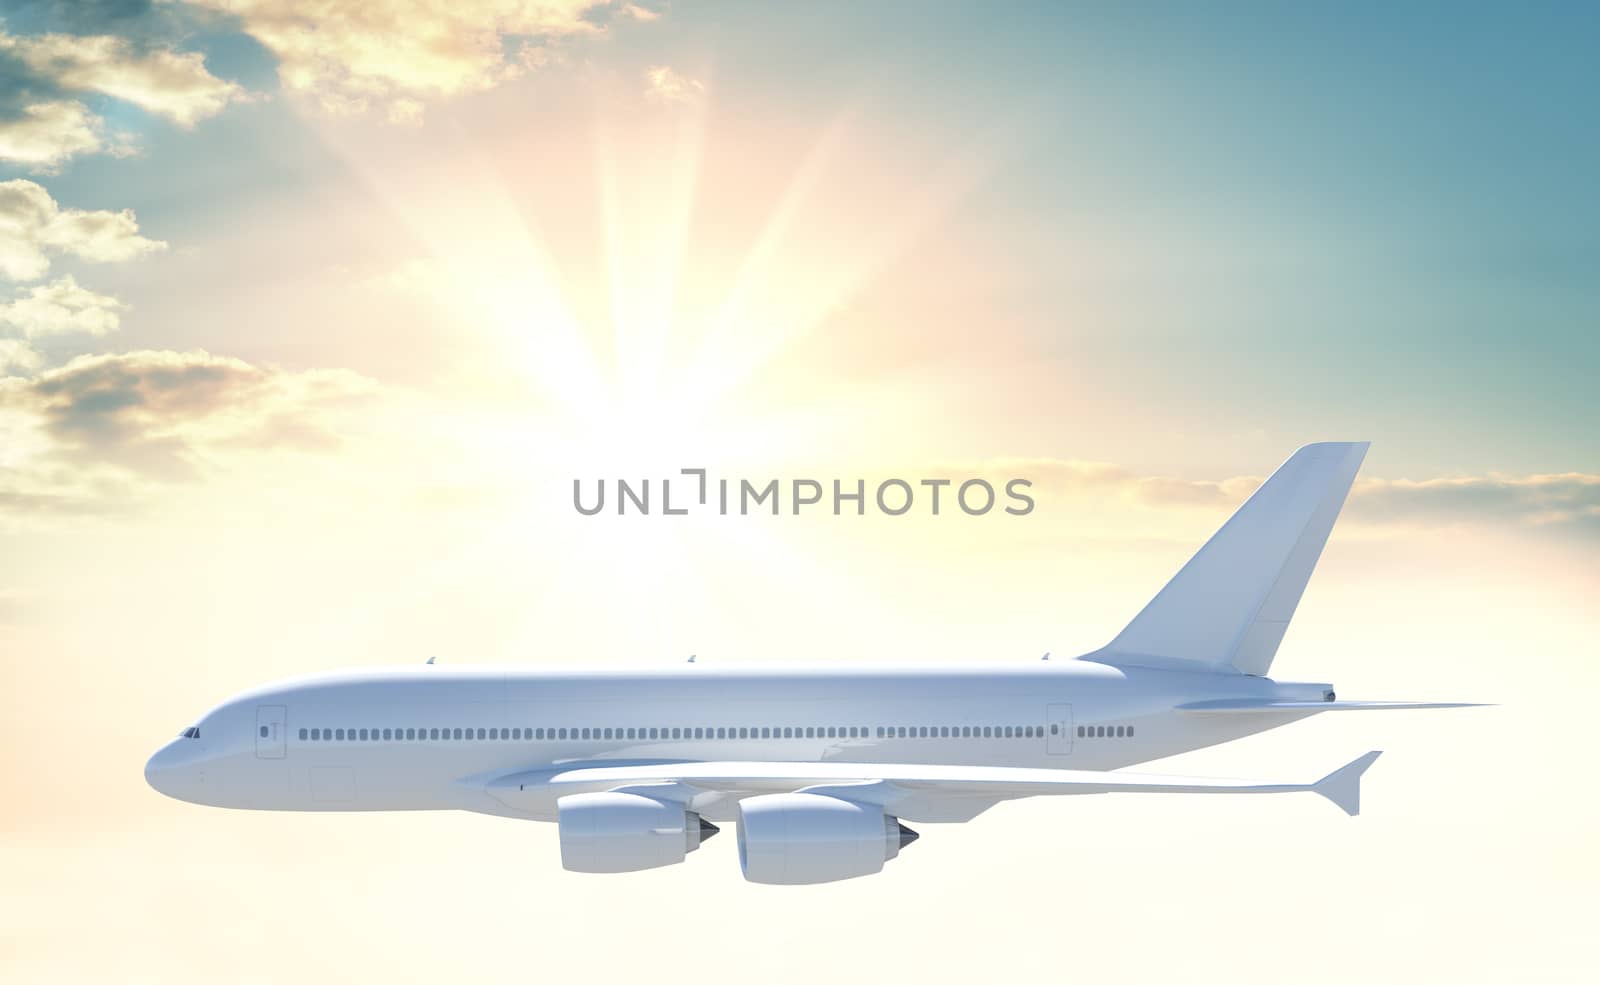 Commercial passenger airplane on beautiful colorful sunset background. 3d illustration